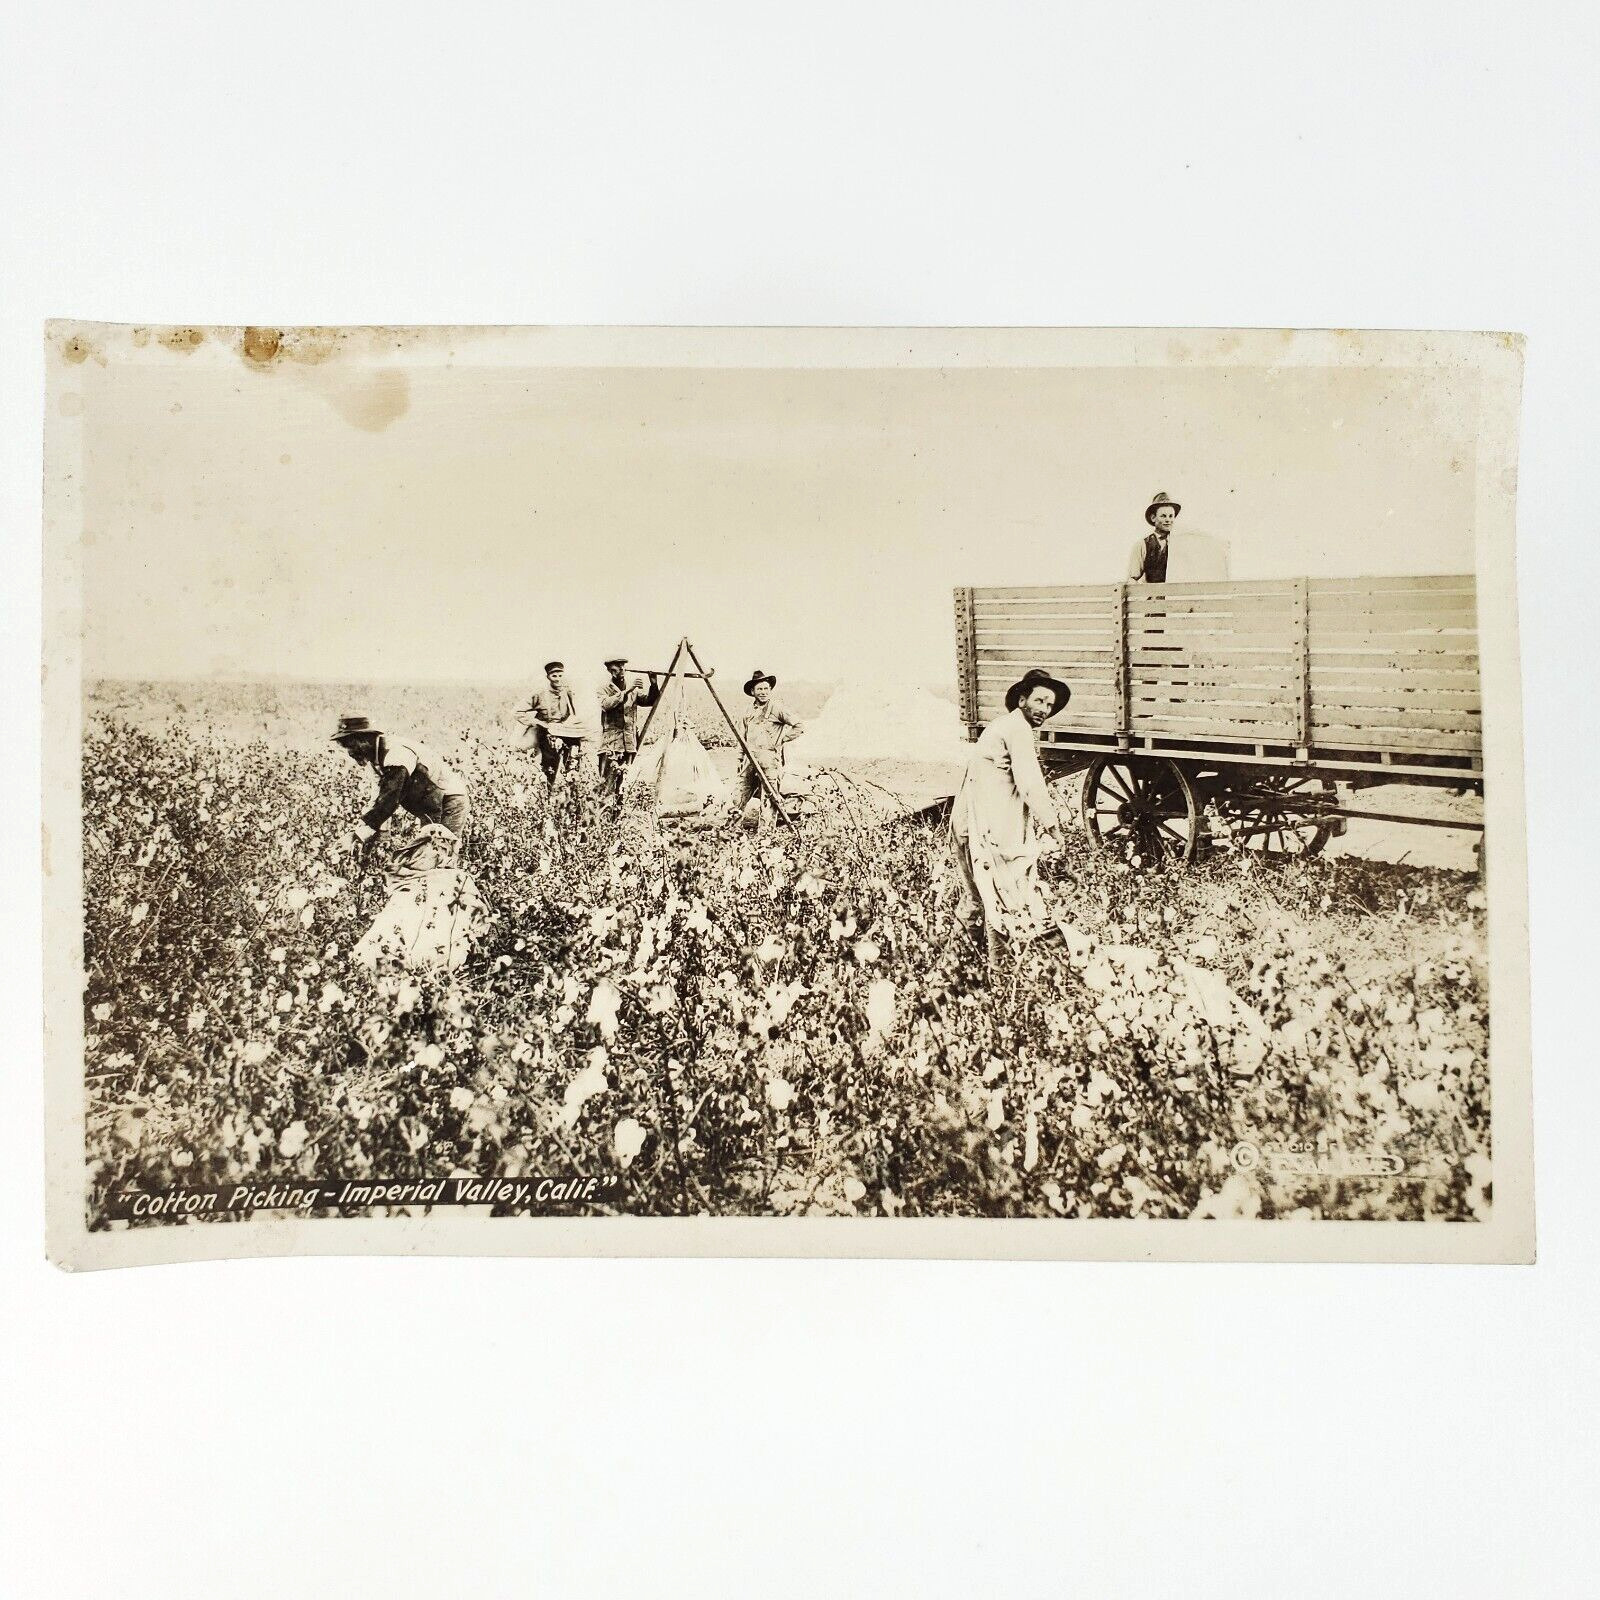 Imperial Valley Cotton Picking RPPC Postcard 1920s California Farmers C3280